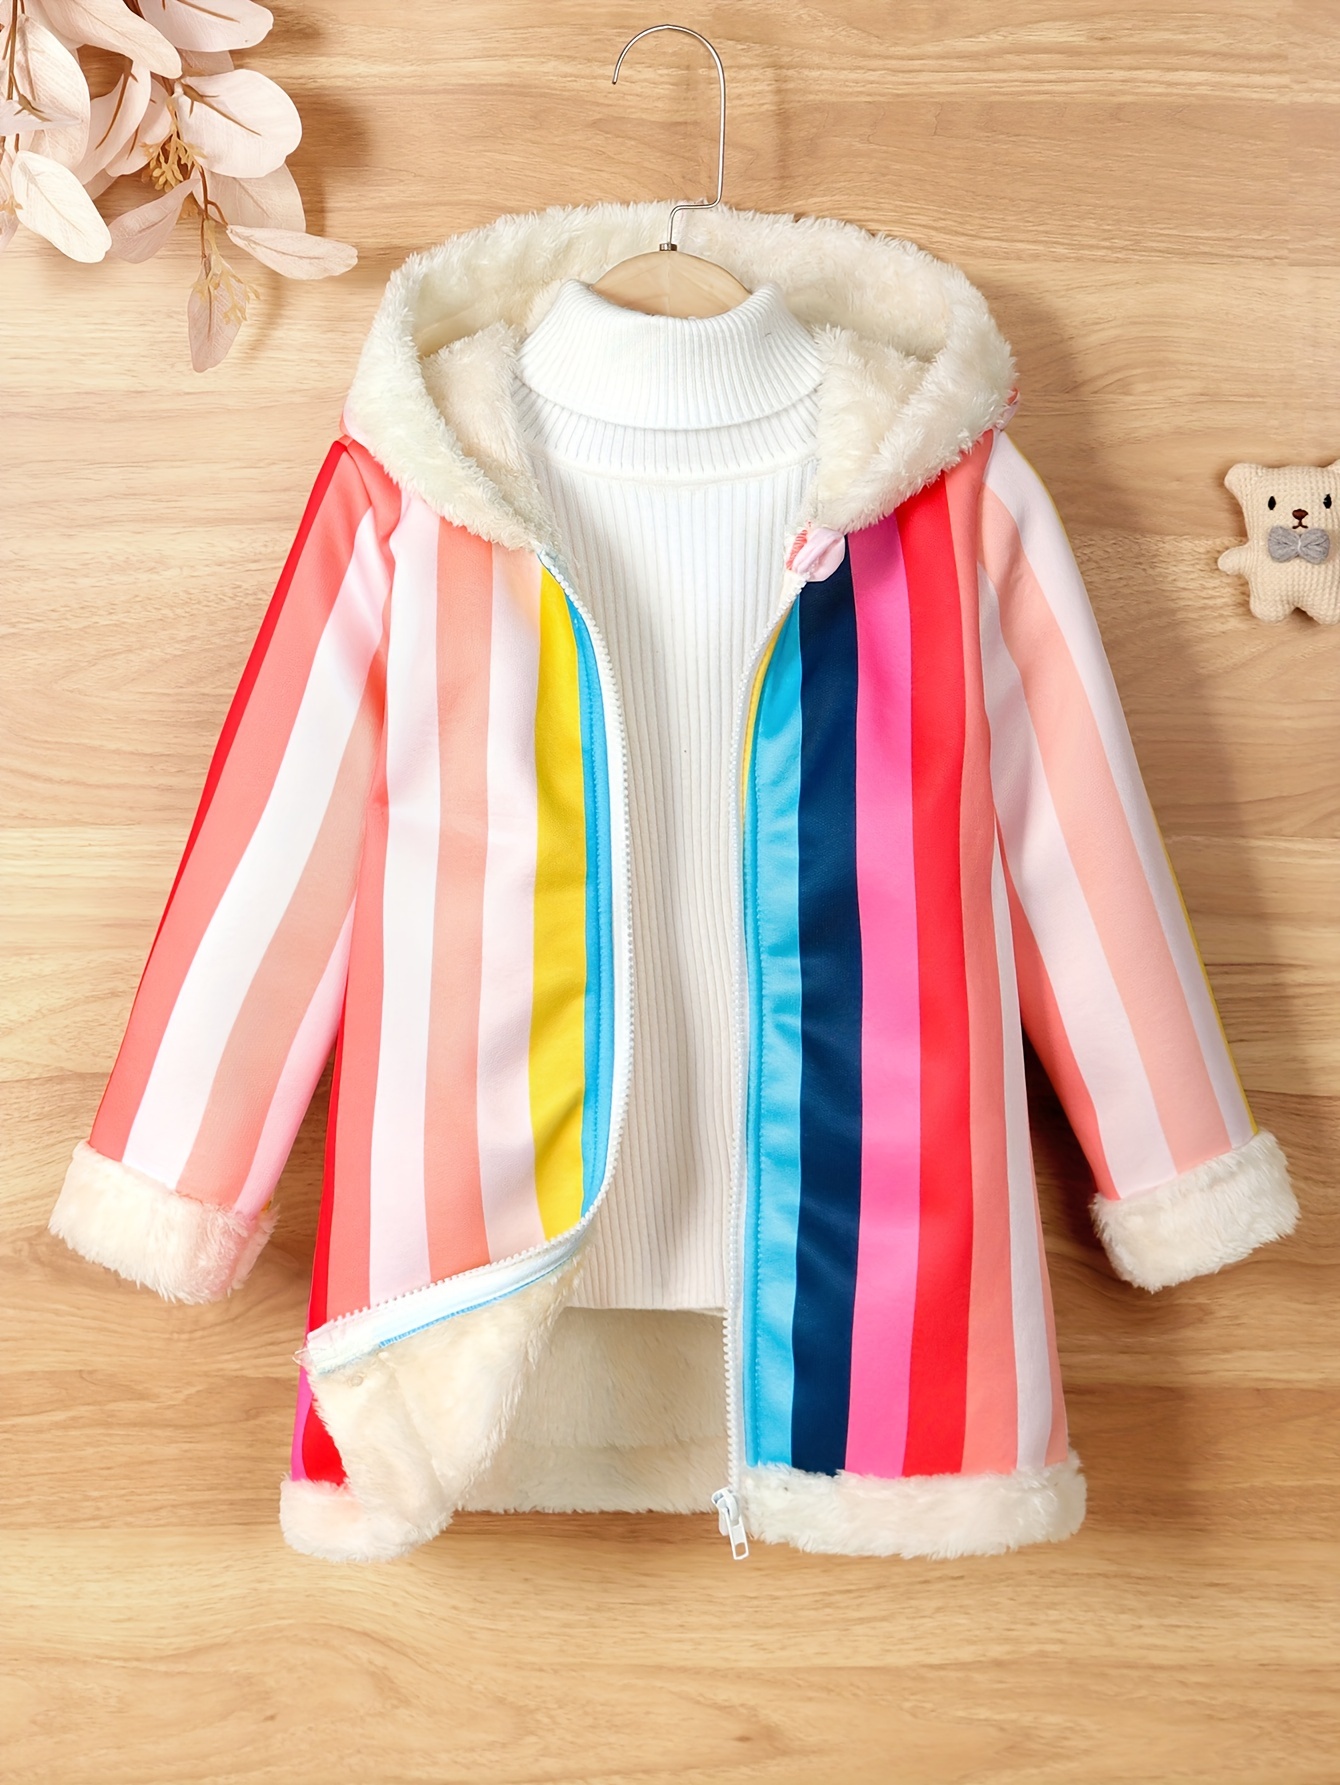 Winter Colorful Striped Hooded Coat For Girls, Fleece Warm Jacket Coat,  Children's Clothes